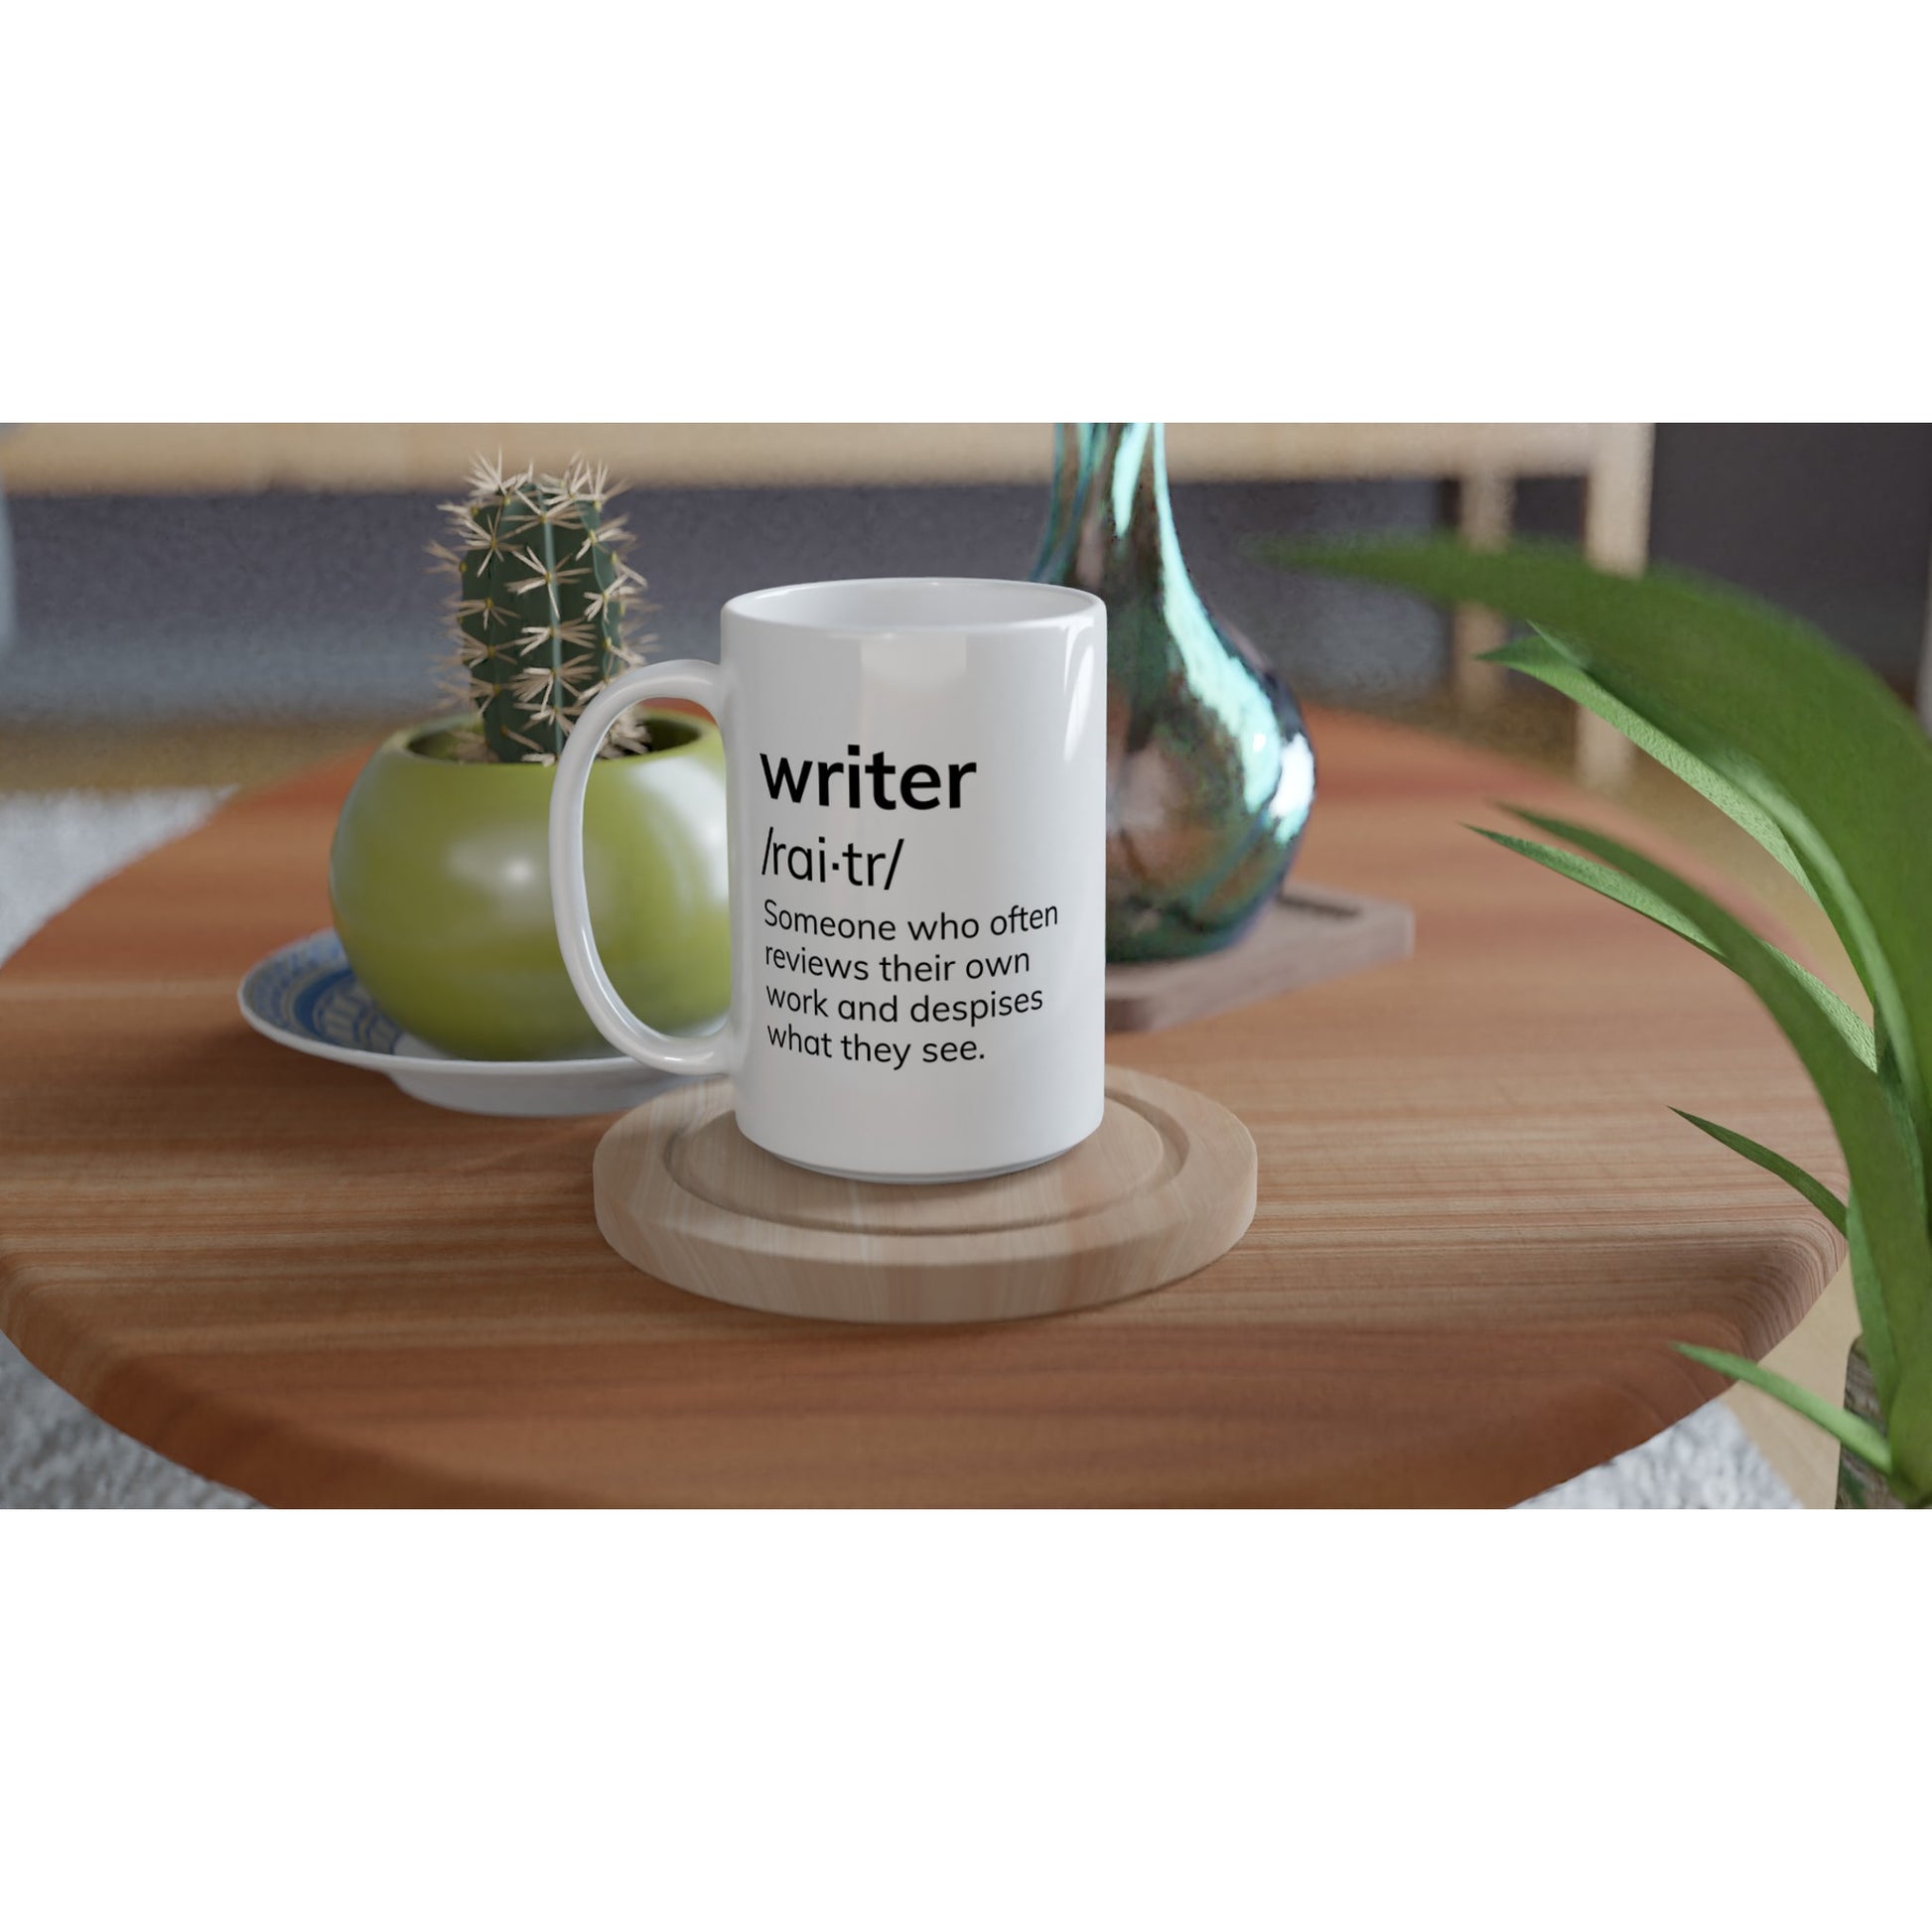 A white writing themed mug with the word "Writer: Someone who often reviews their own work and despises what they see" on it.